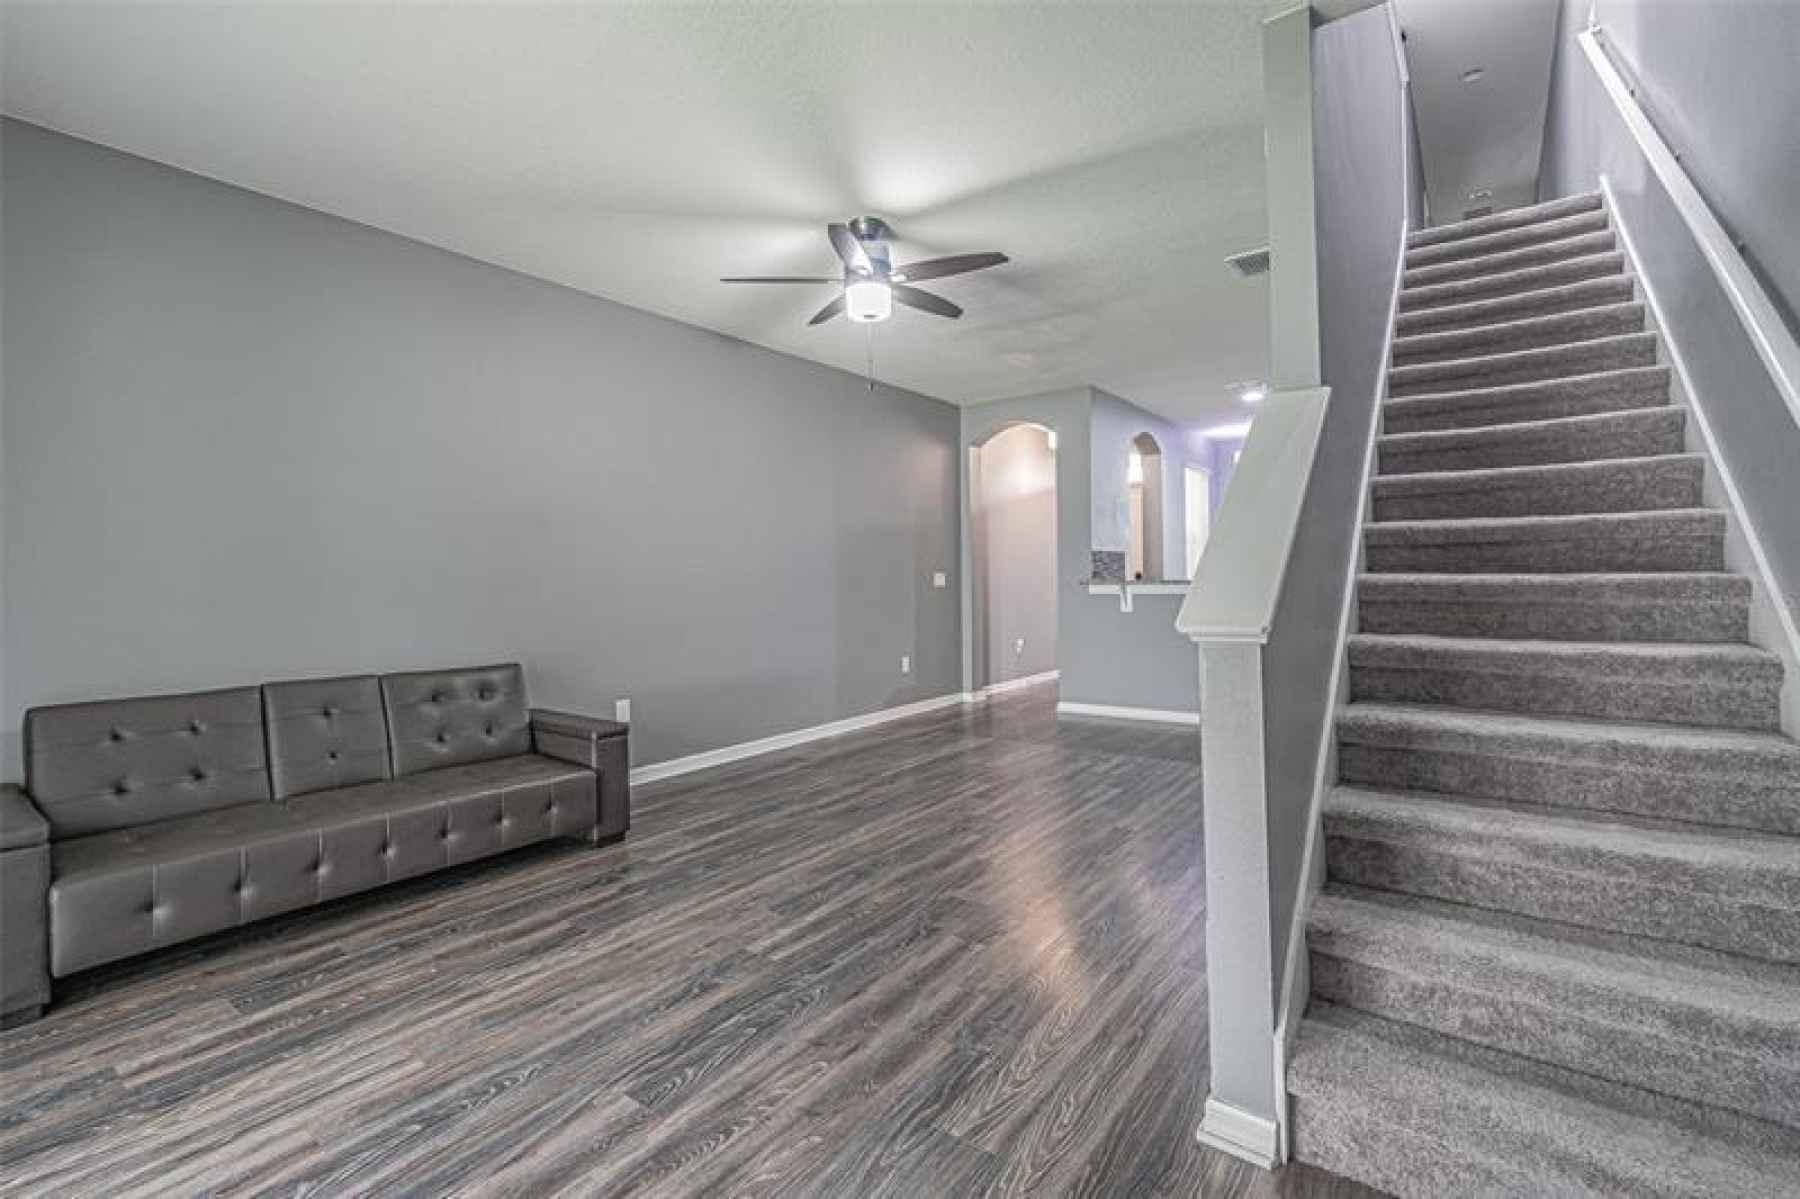 The stairs take you to the second floor where all 3 bedrooms are located.